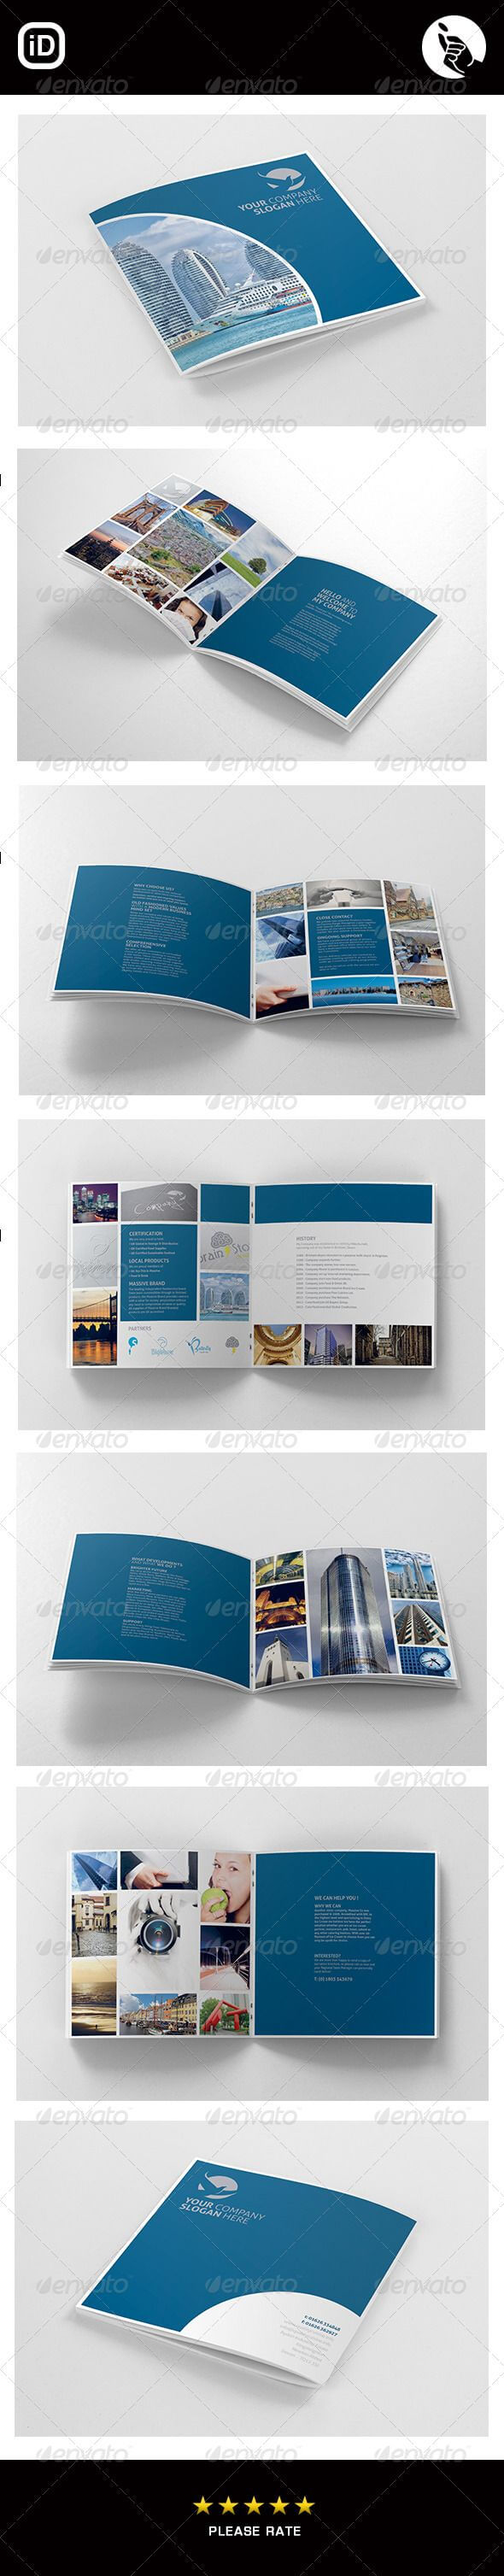 Corporate Square 12 Page Brochure | Design: Layout With 12 Page Brochure Template